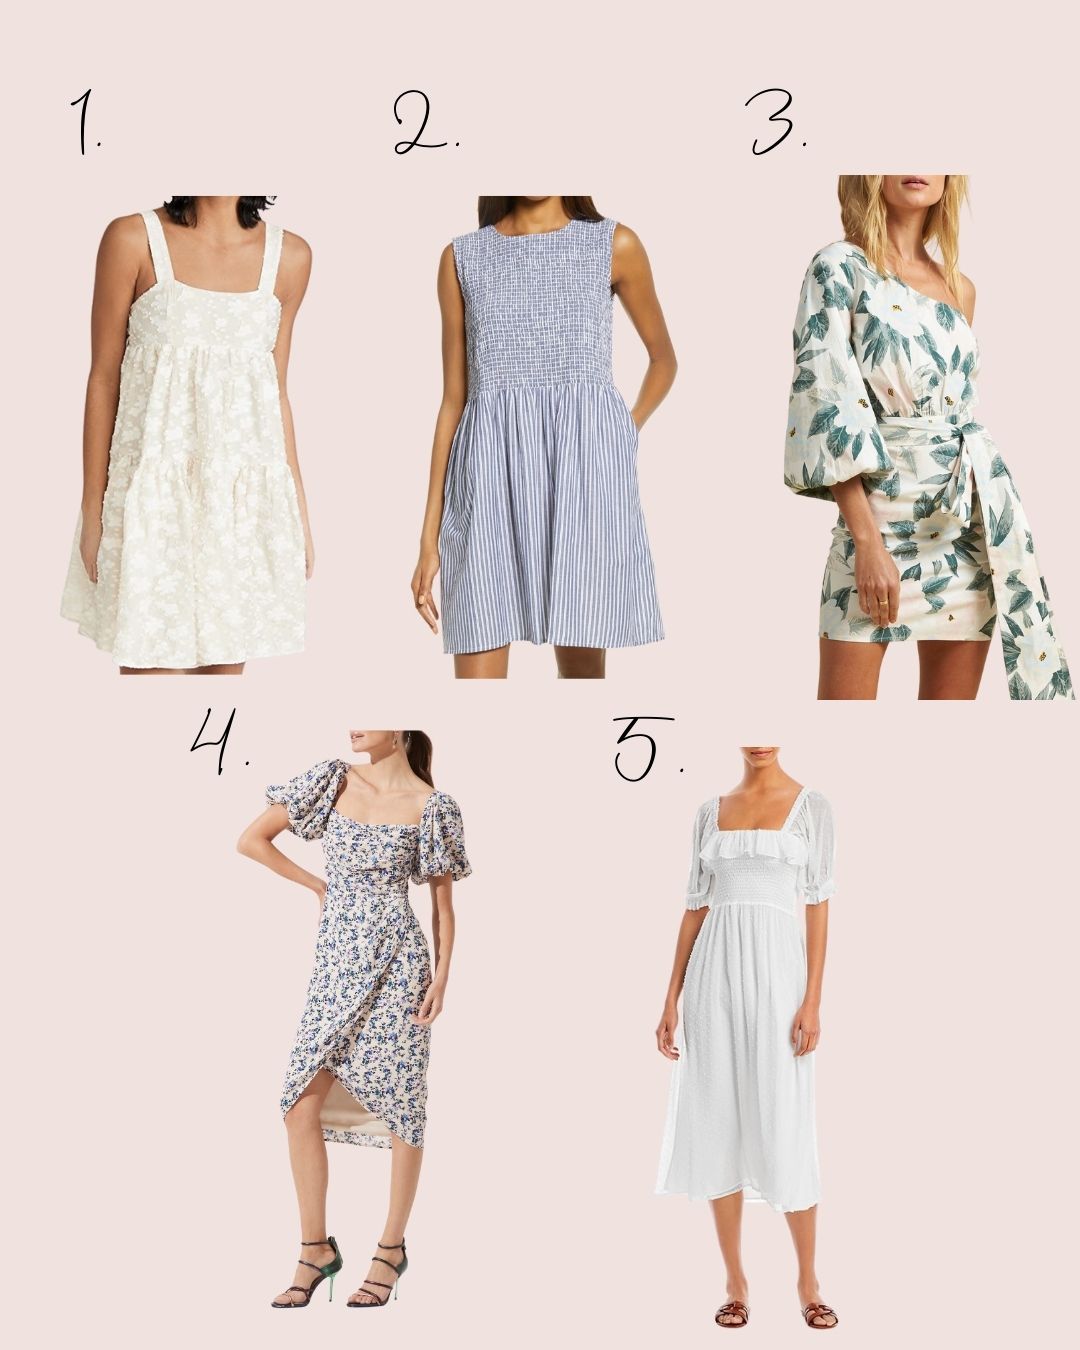 My Dress Picks For Easter • BrightonTheDay